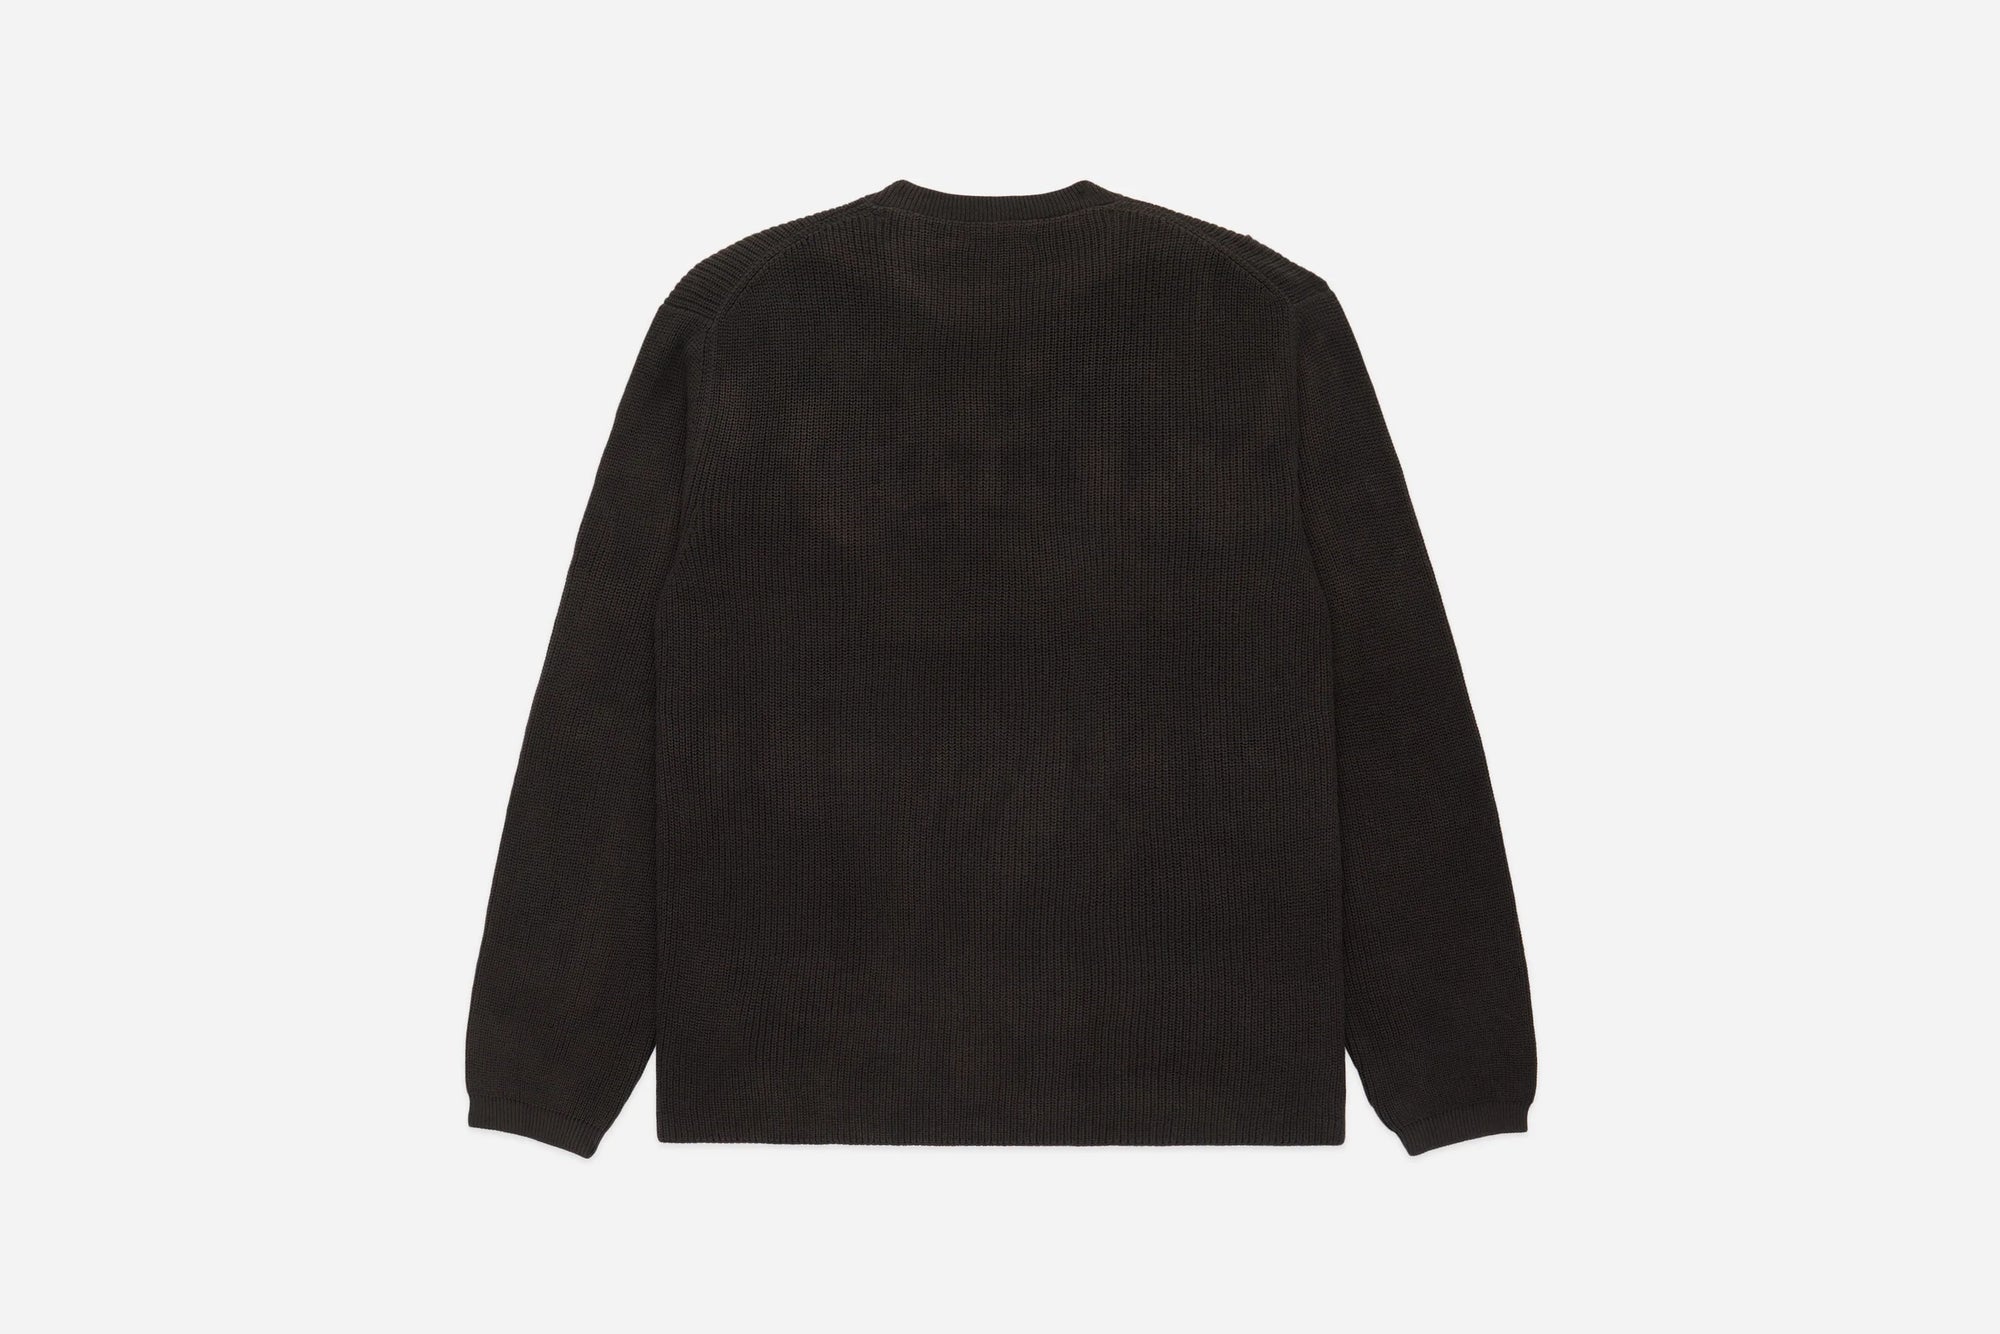 3Sixteen Garment Dyed Knit Long Sleeve Sweater in Brown